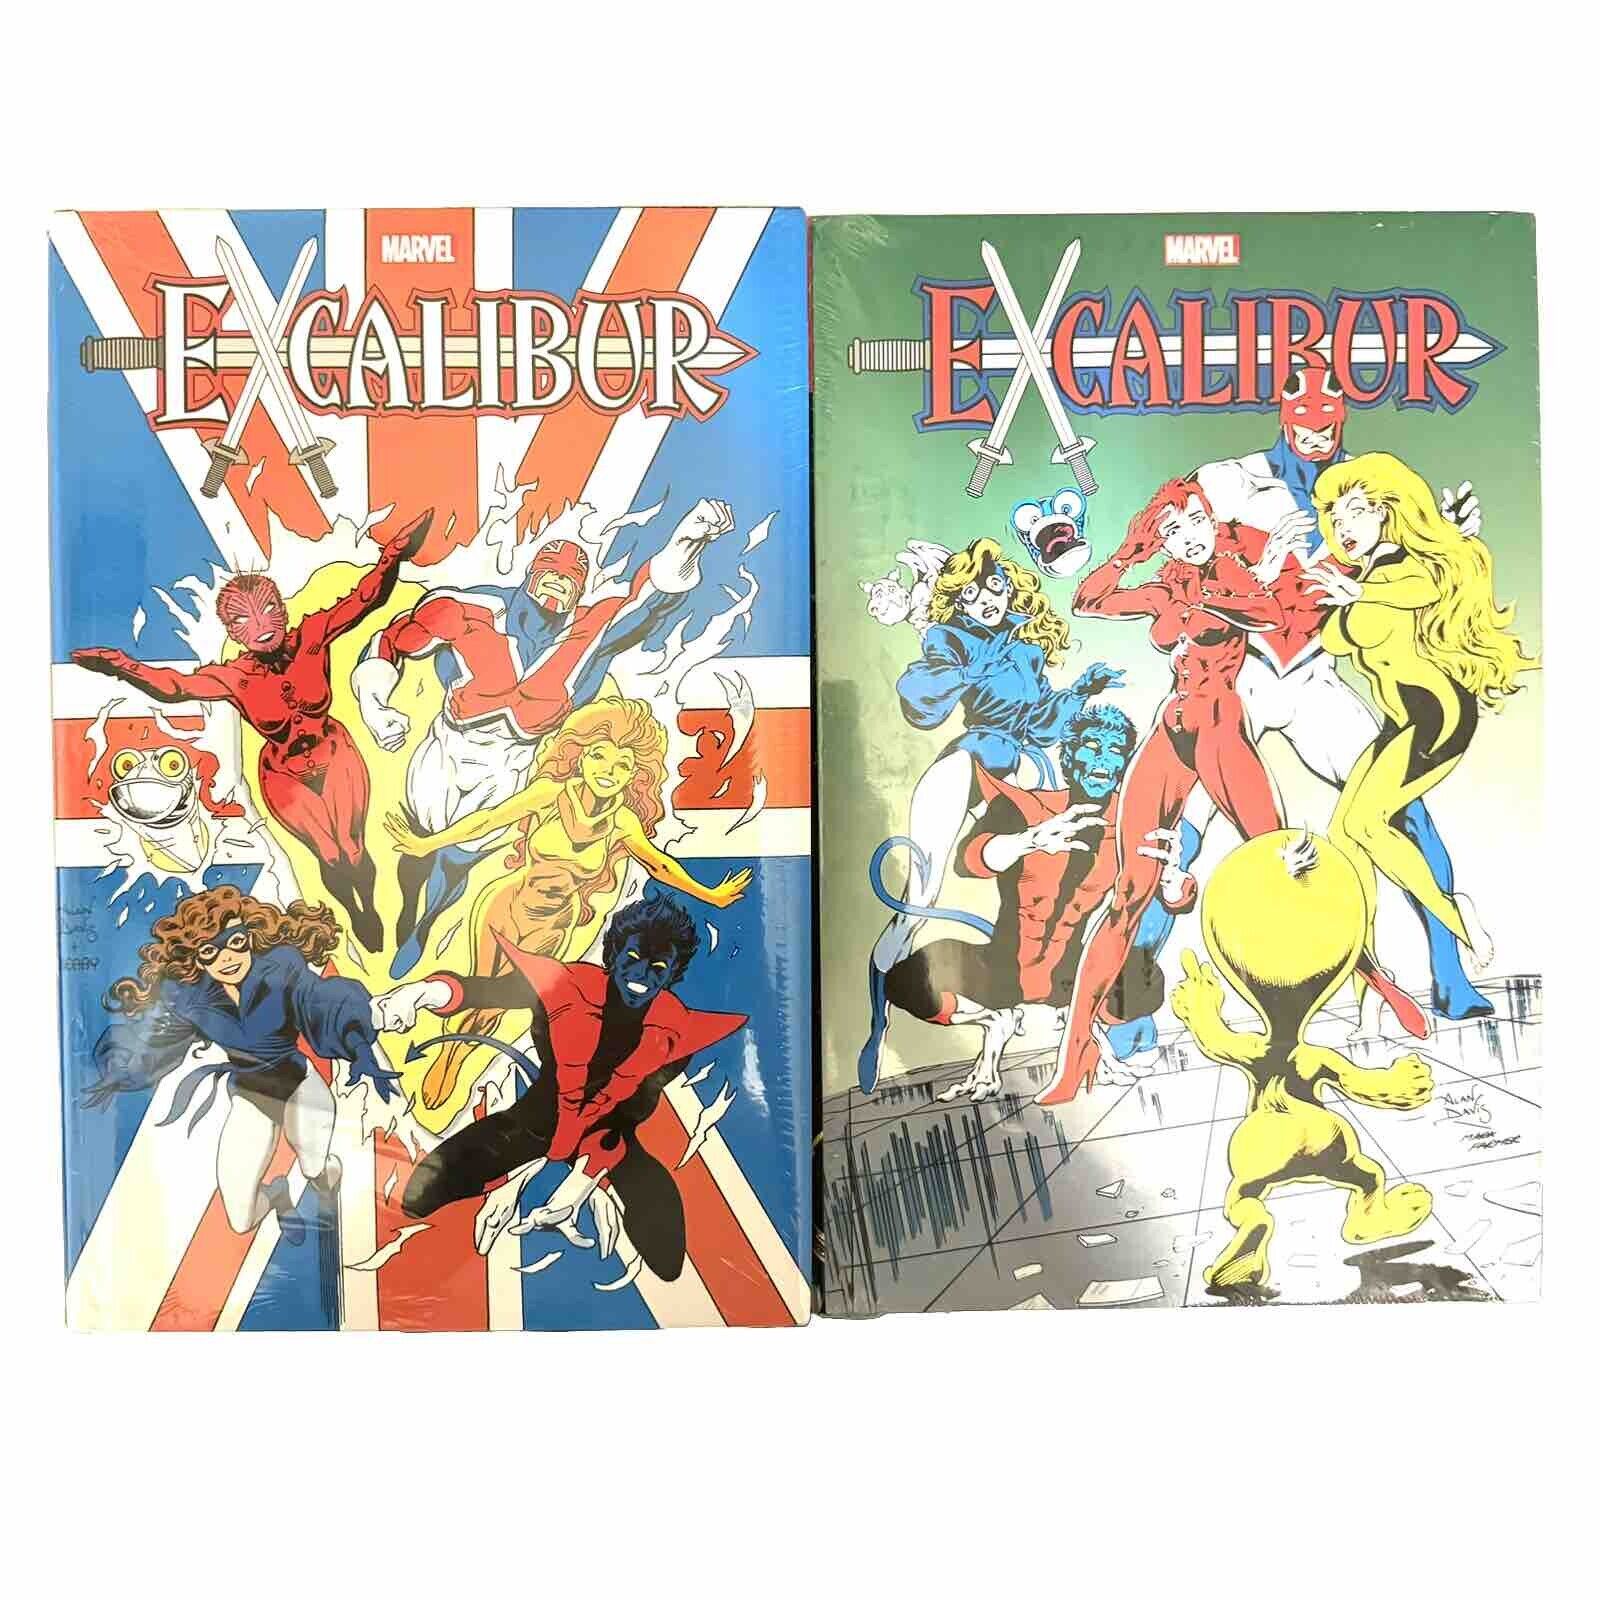 Excalibur Omnibus Vol 1 AND Vol 2 New Sealed Hardcover BN $5 Flat Shipping